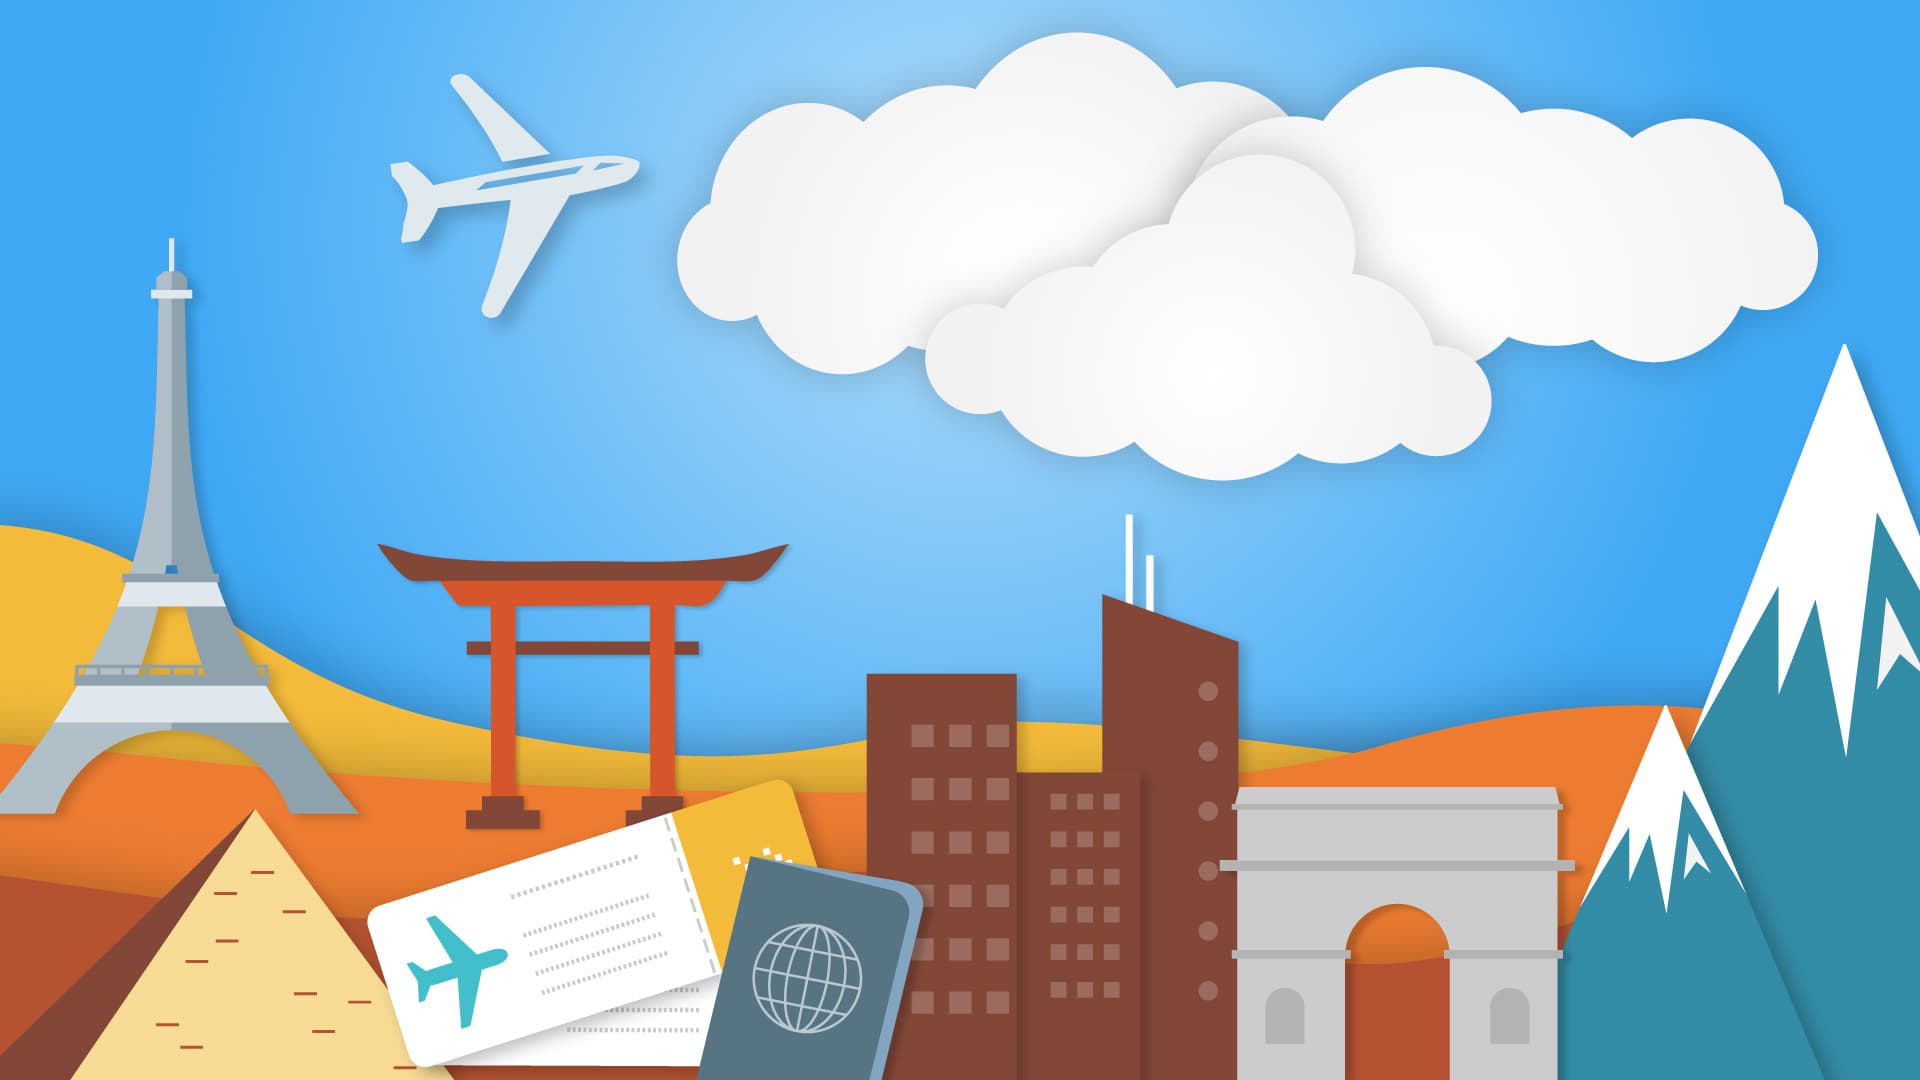 Illustration of blue sky with Eiffel Tower, pyramid, plane/plane tickets and passport, buildings and mountains